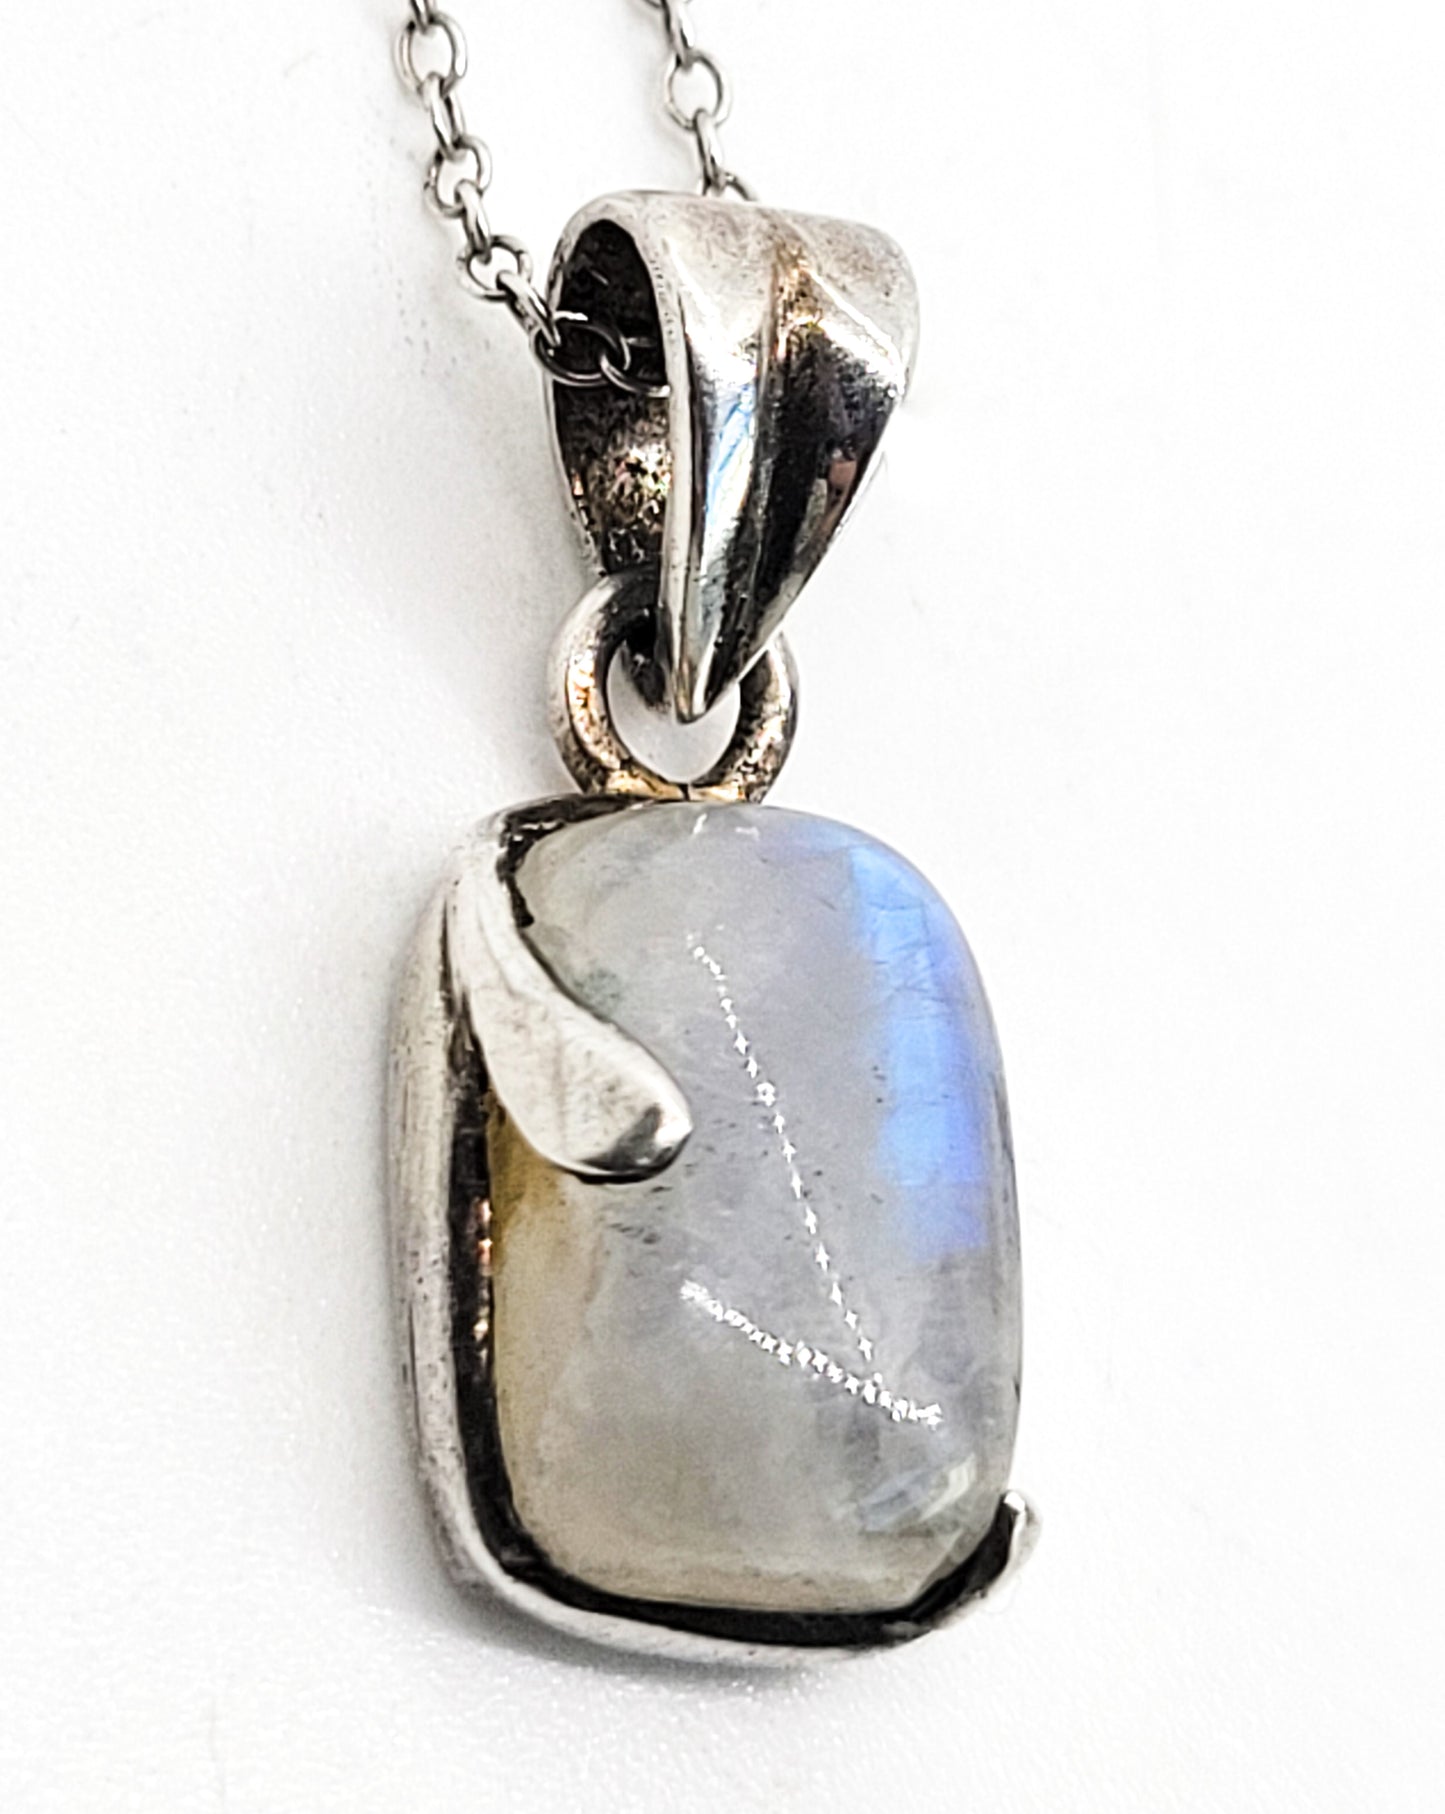 Flashy moonstone twisted delicate sterling silver pendant necklace